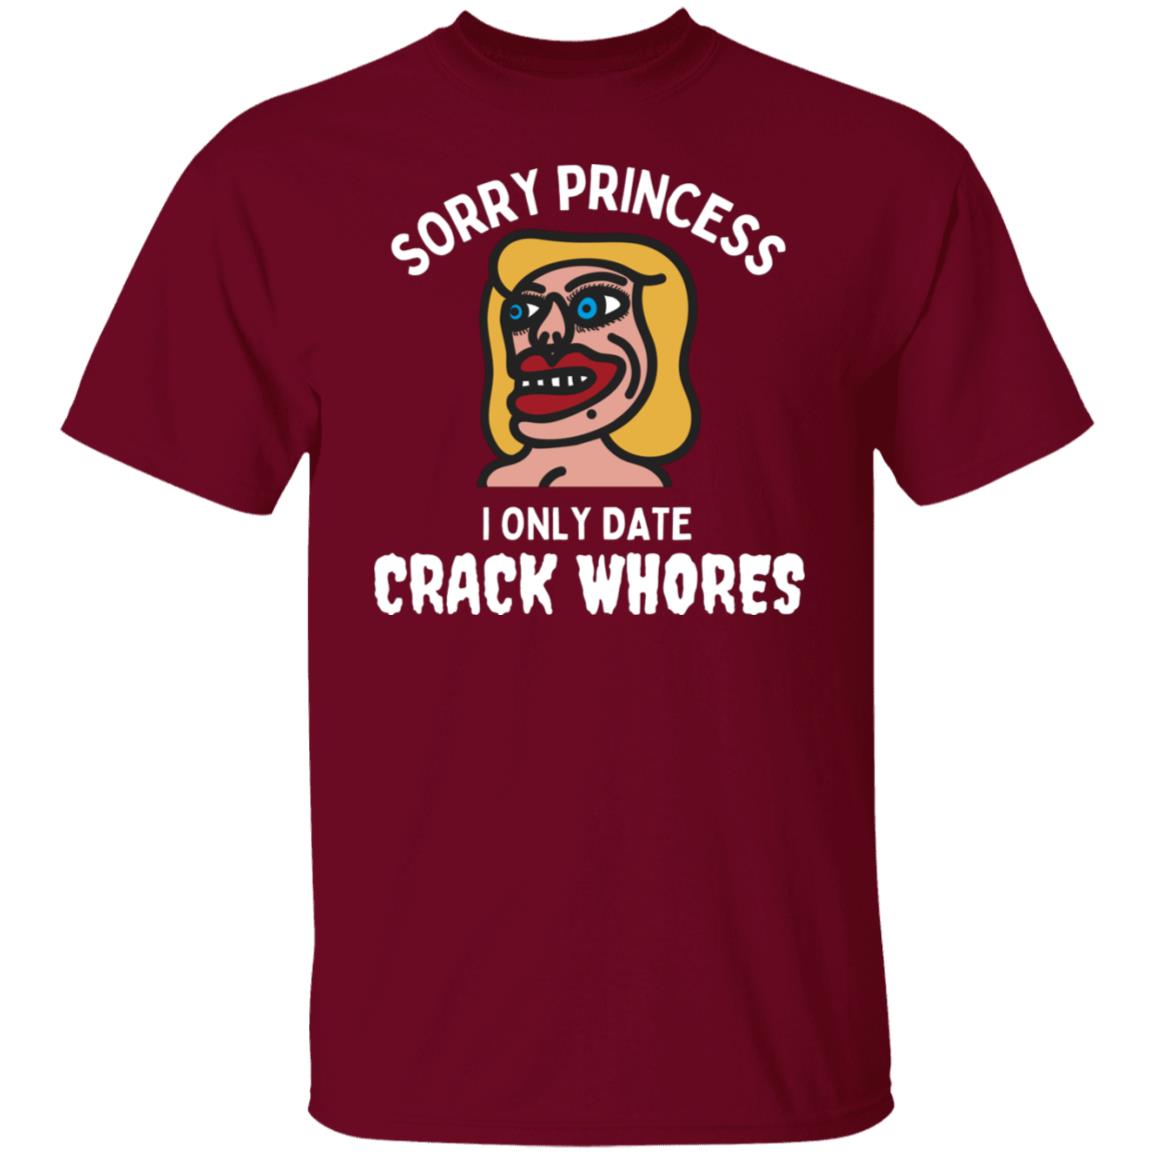 Sorry Princess I Only Date Crack Heads Adult Humor Graphic Tee T-Shirt